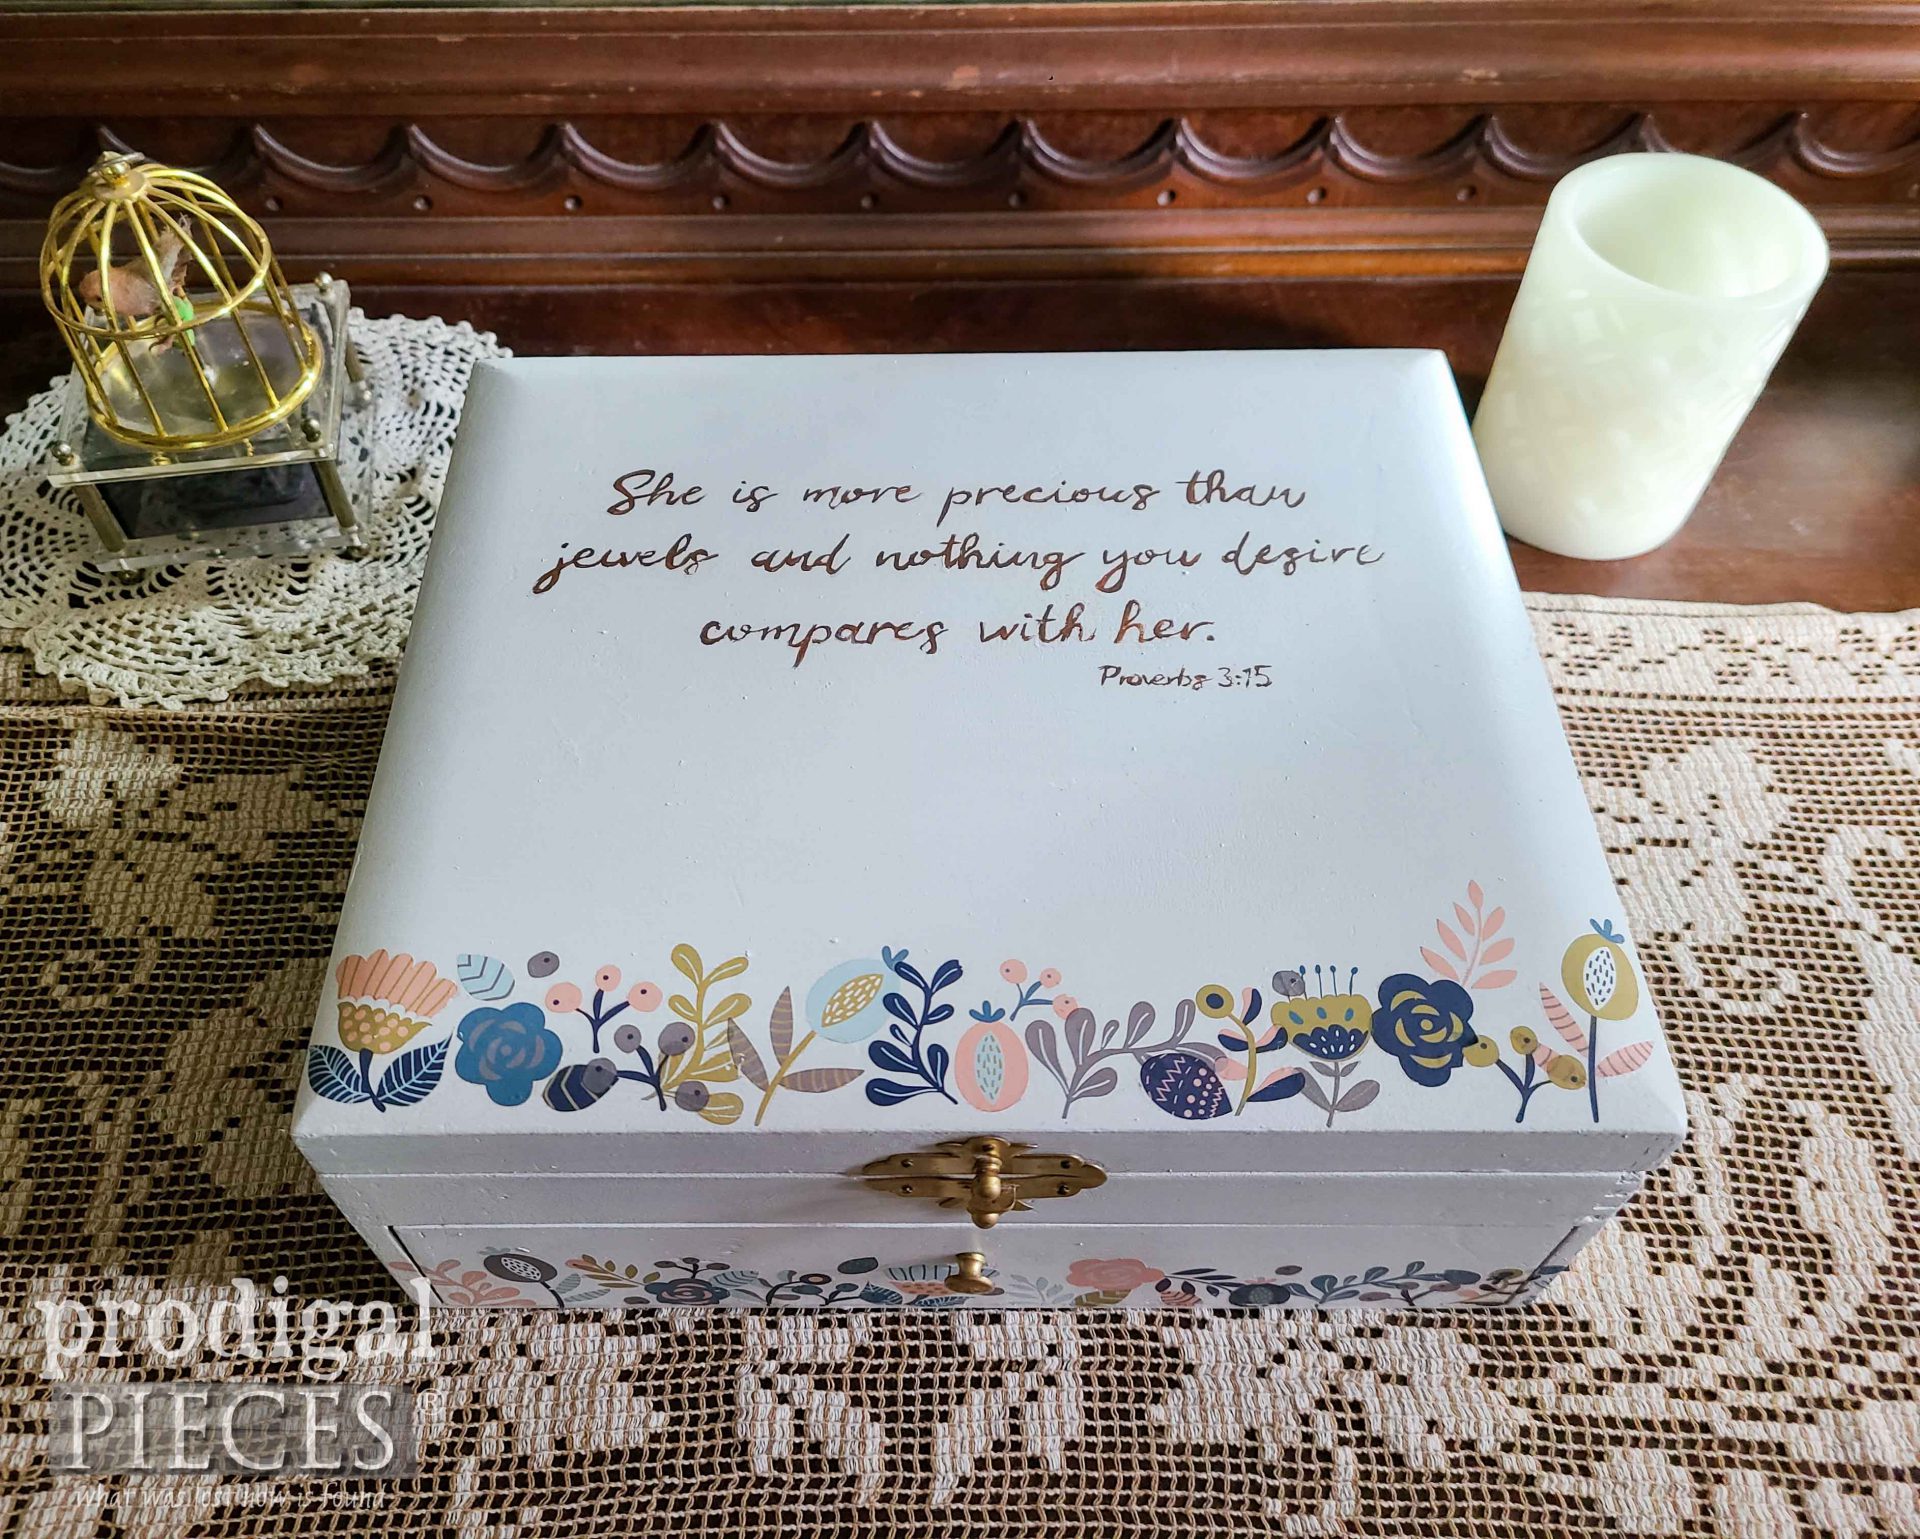 Top View of DIY Jewelry Box from Upcycled Silverware Chest Created by Larissa of Prodigal Pieces | prodigalpieces.com #prodigalpieces #diy #upcycled #jewelry #homedecor